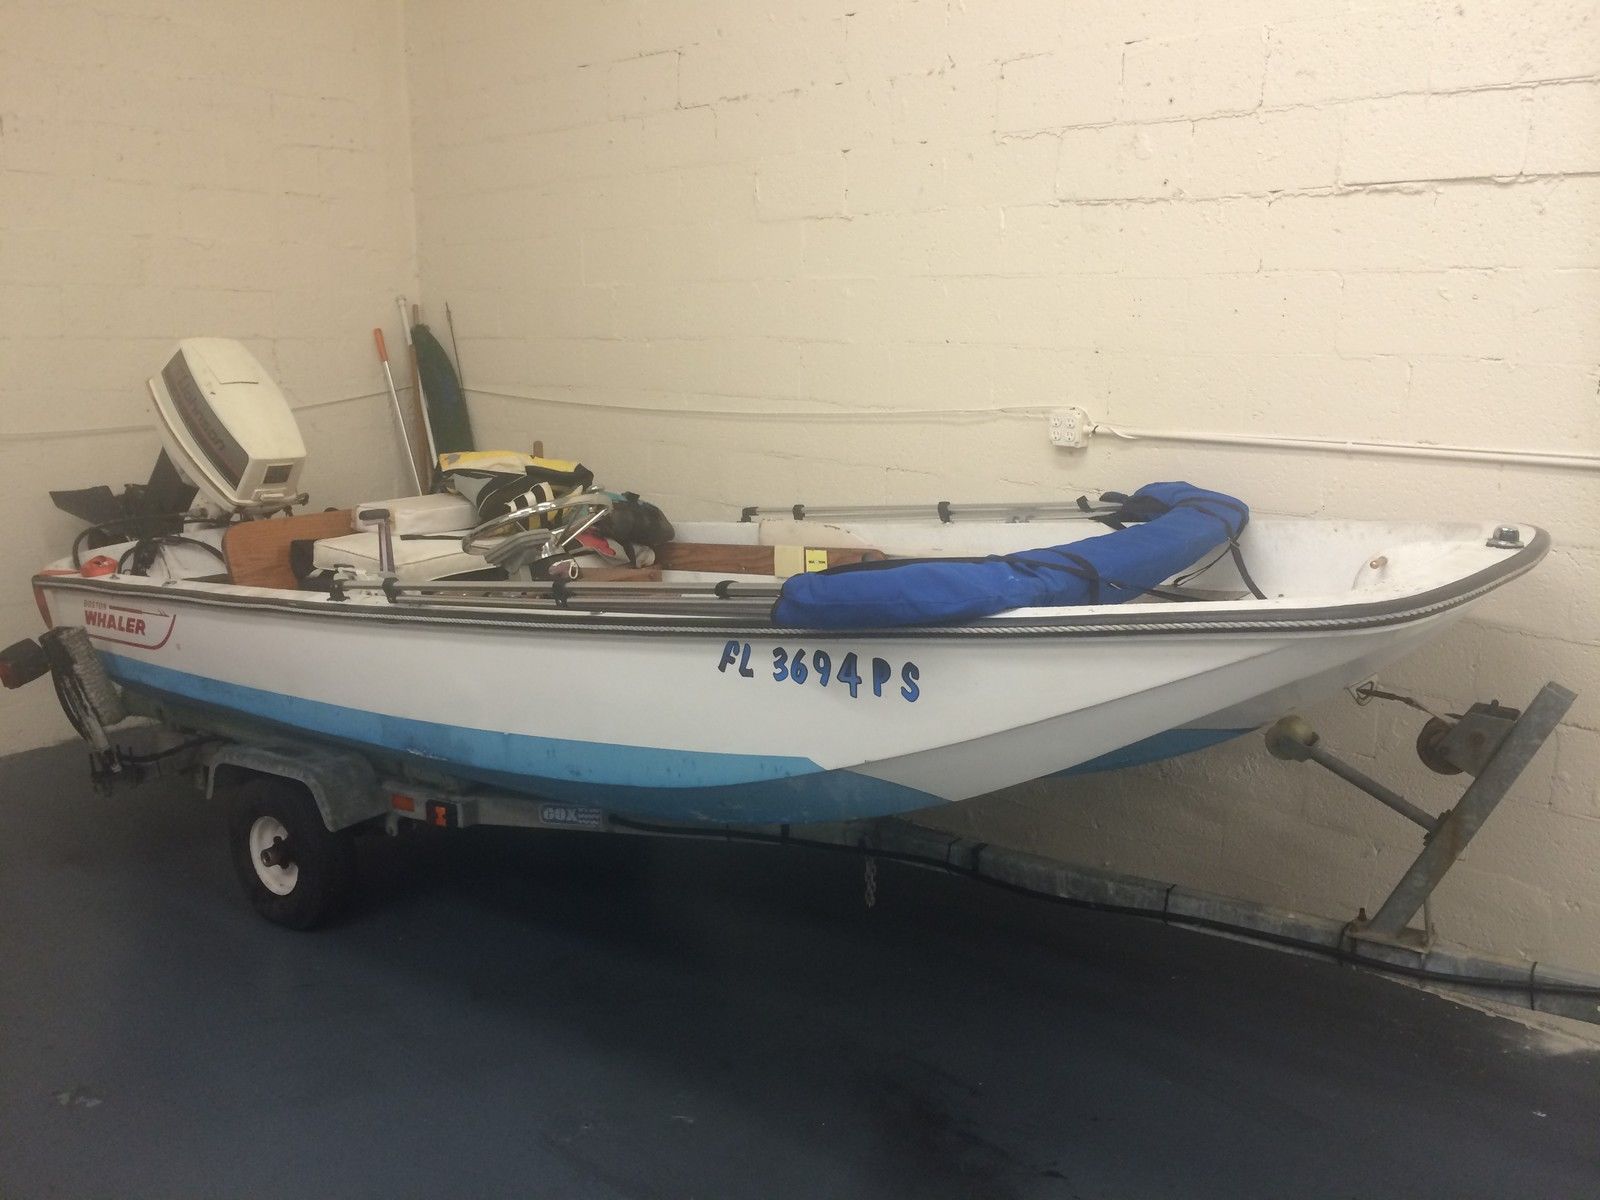 Boston Whaler 13' Skiff 1976 for sale for $500 - Boats-from-USA.com